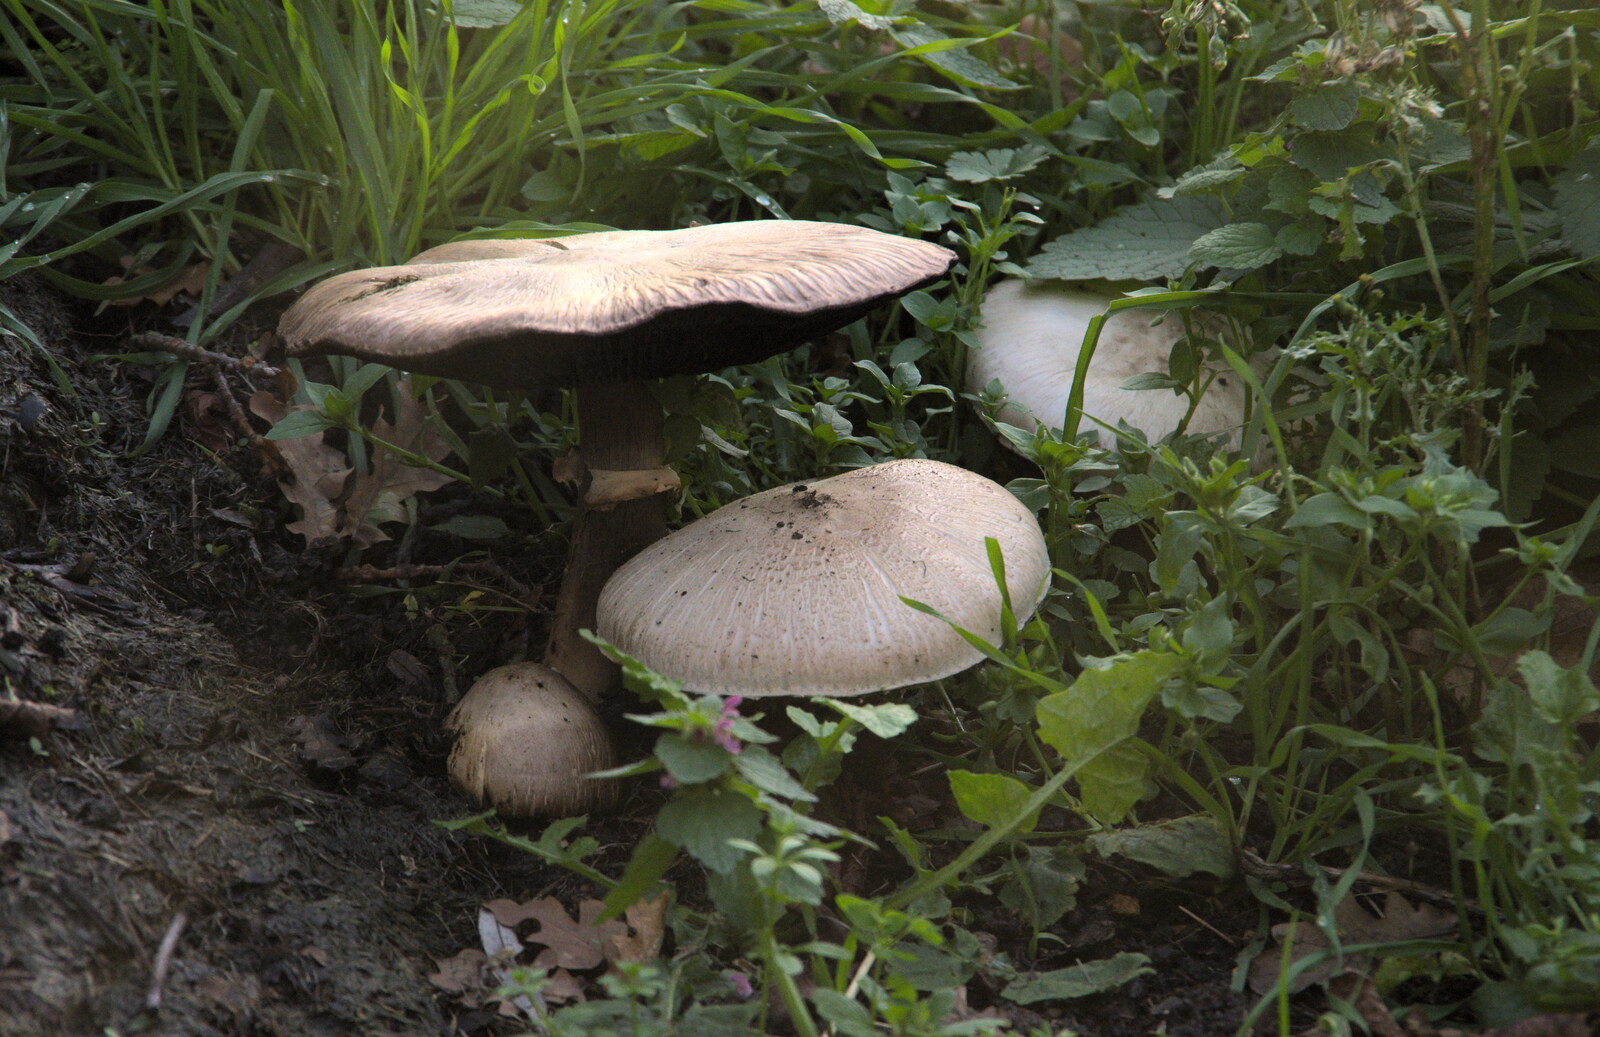 There are some impressive mushrooms in the garden from A Walk Around the Avenue, Brome, Suffolk - 25th October 2020